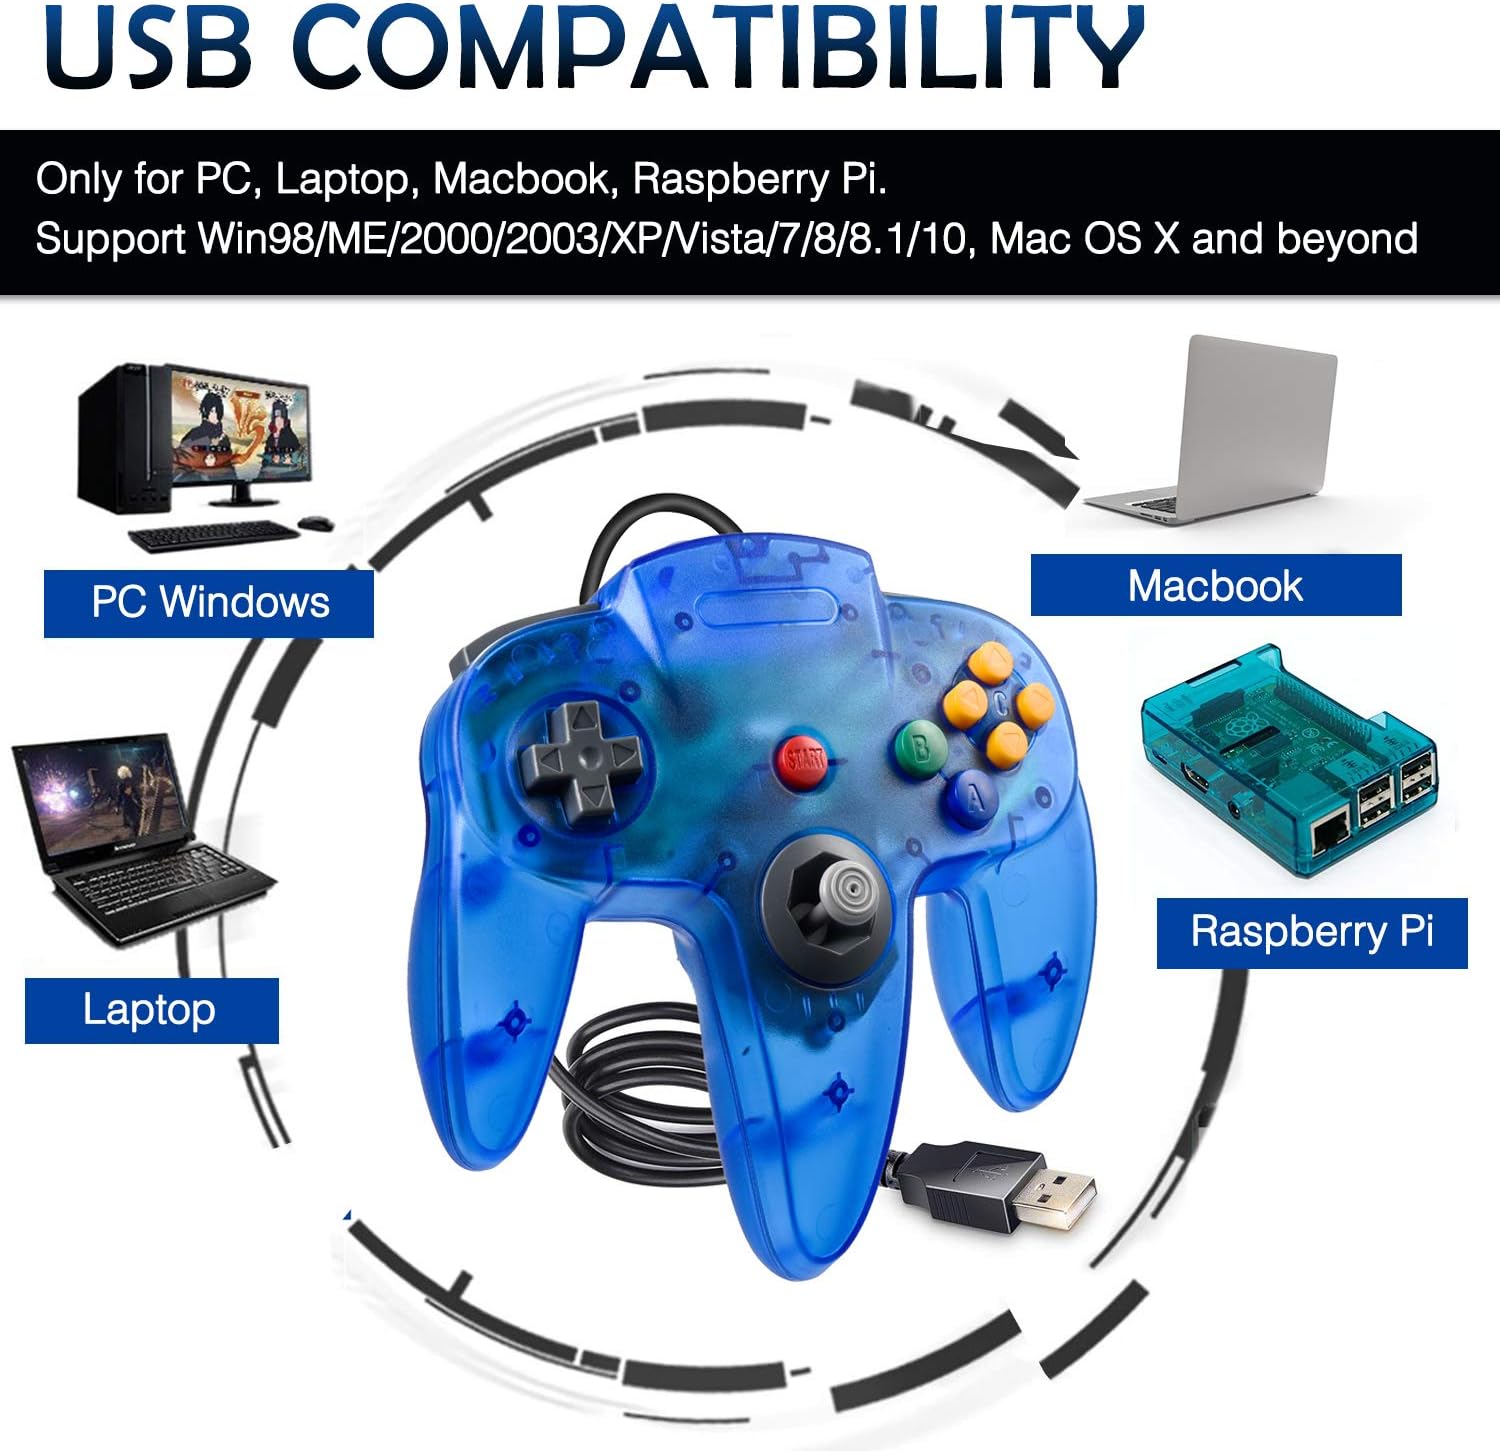 Classic USB Controller Review